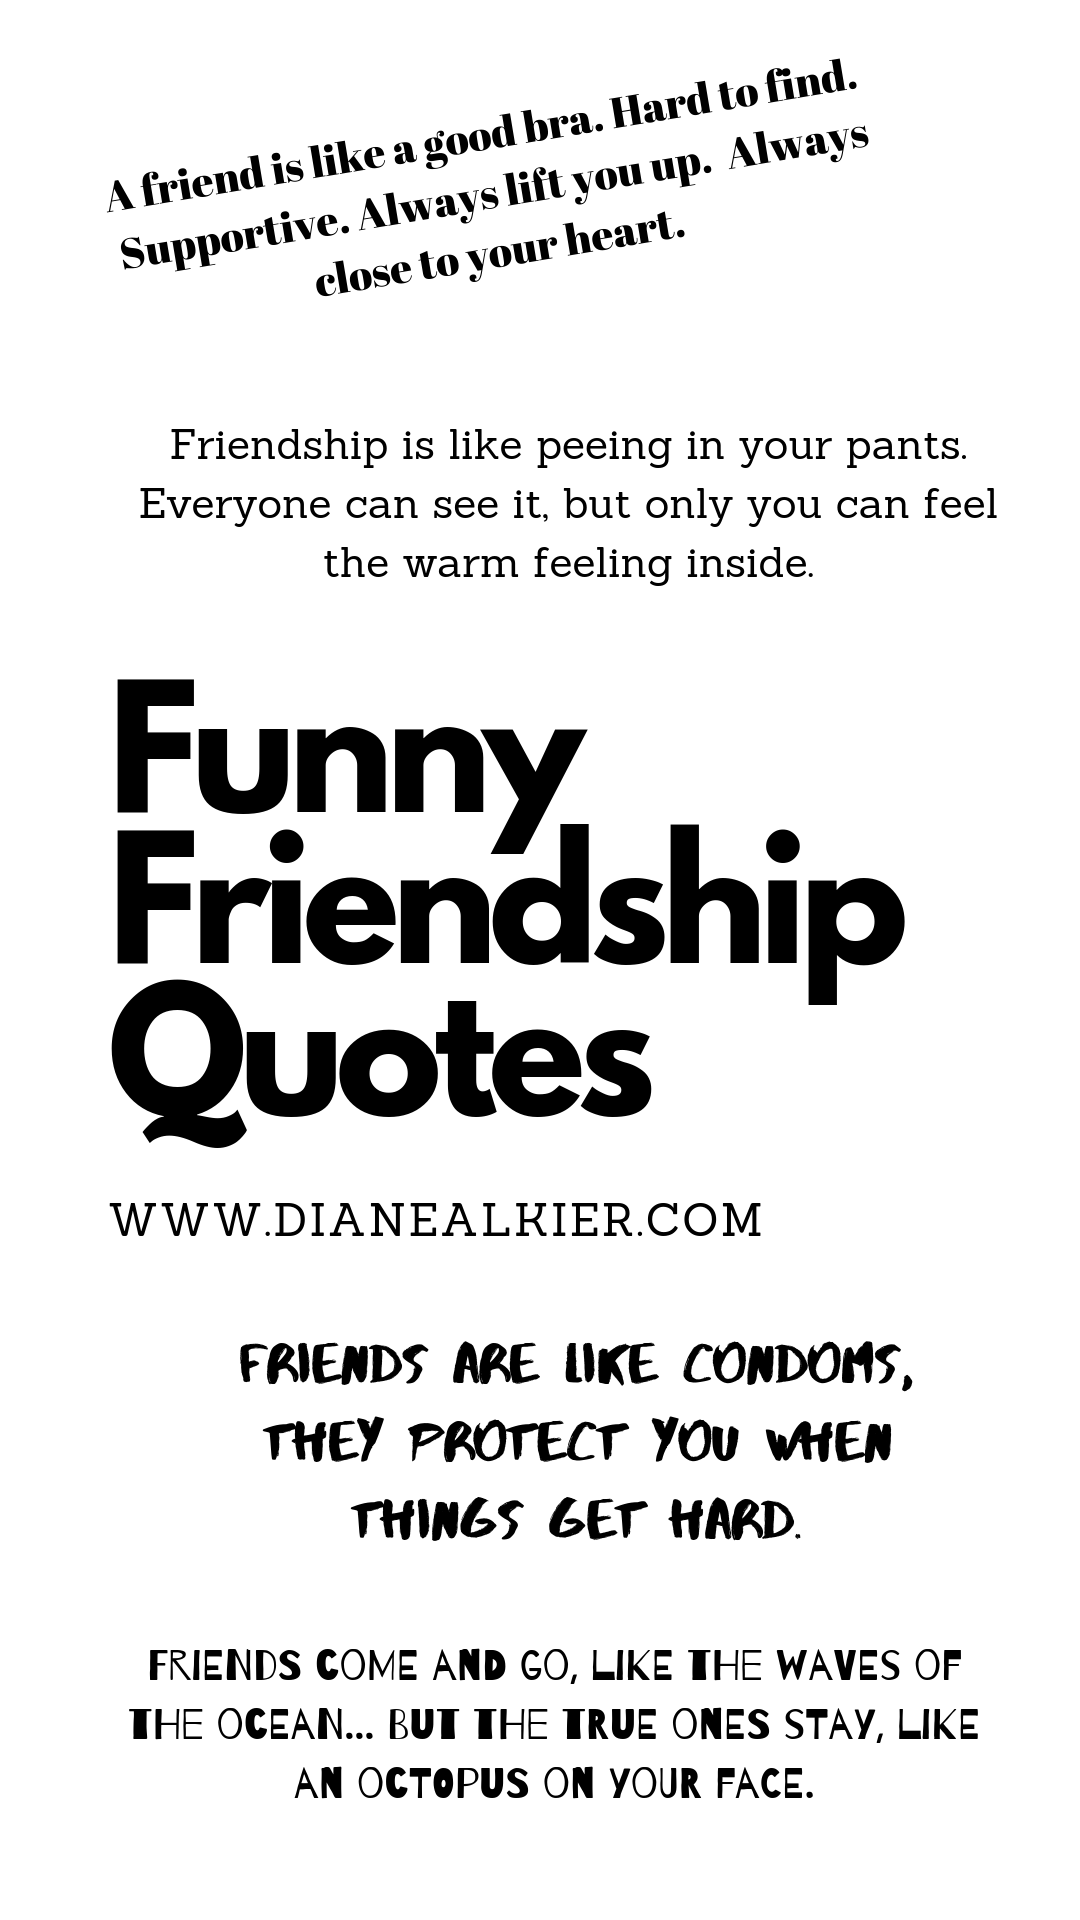 10 Funny Friendship Quotes Diane Alkier